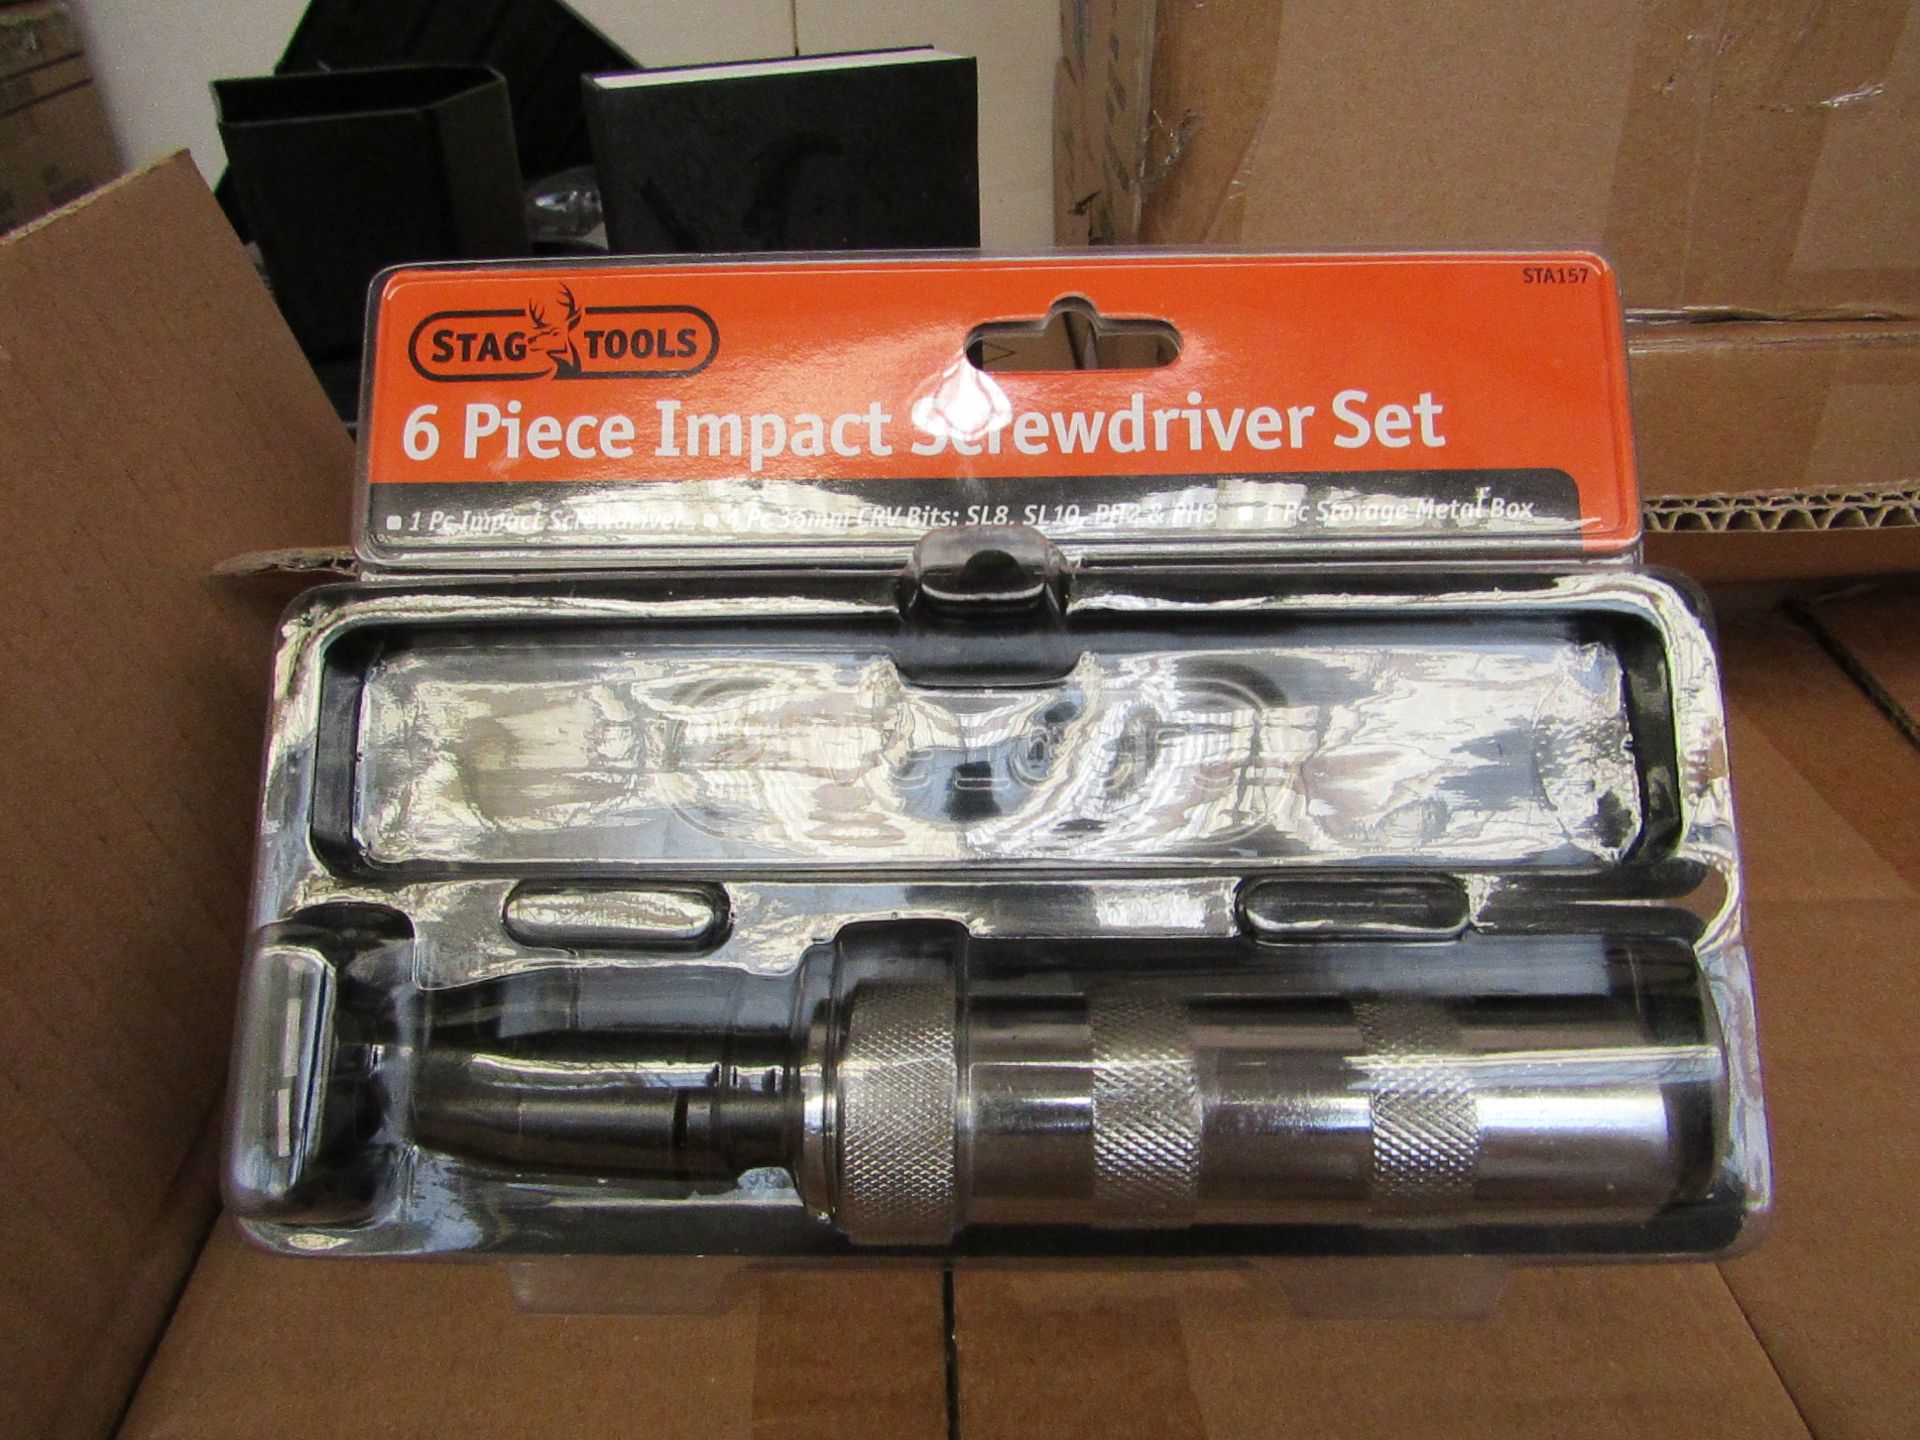 Stag Tools 6 piece impact screwdriver set, new and boxed.